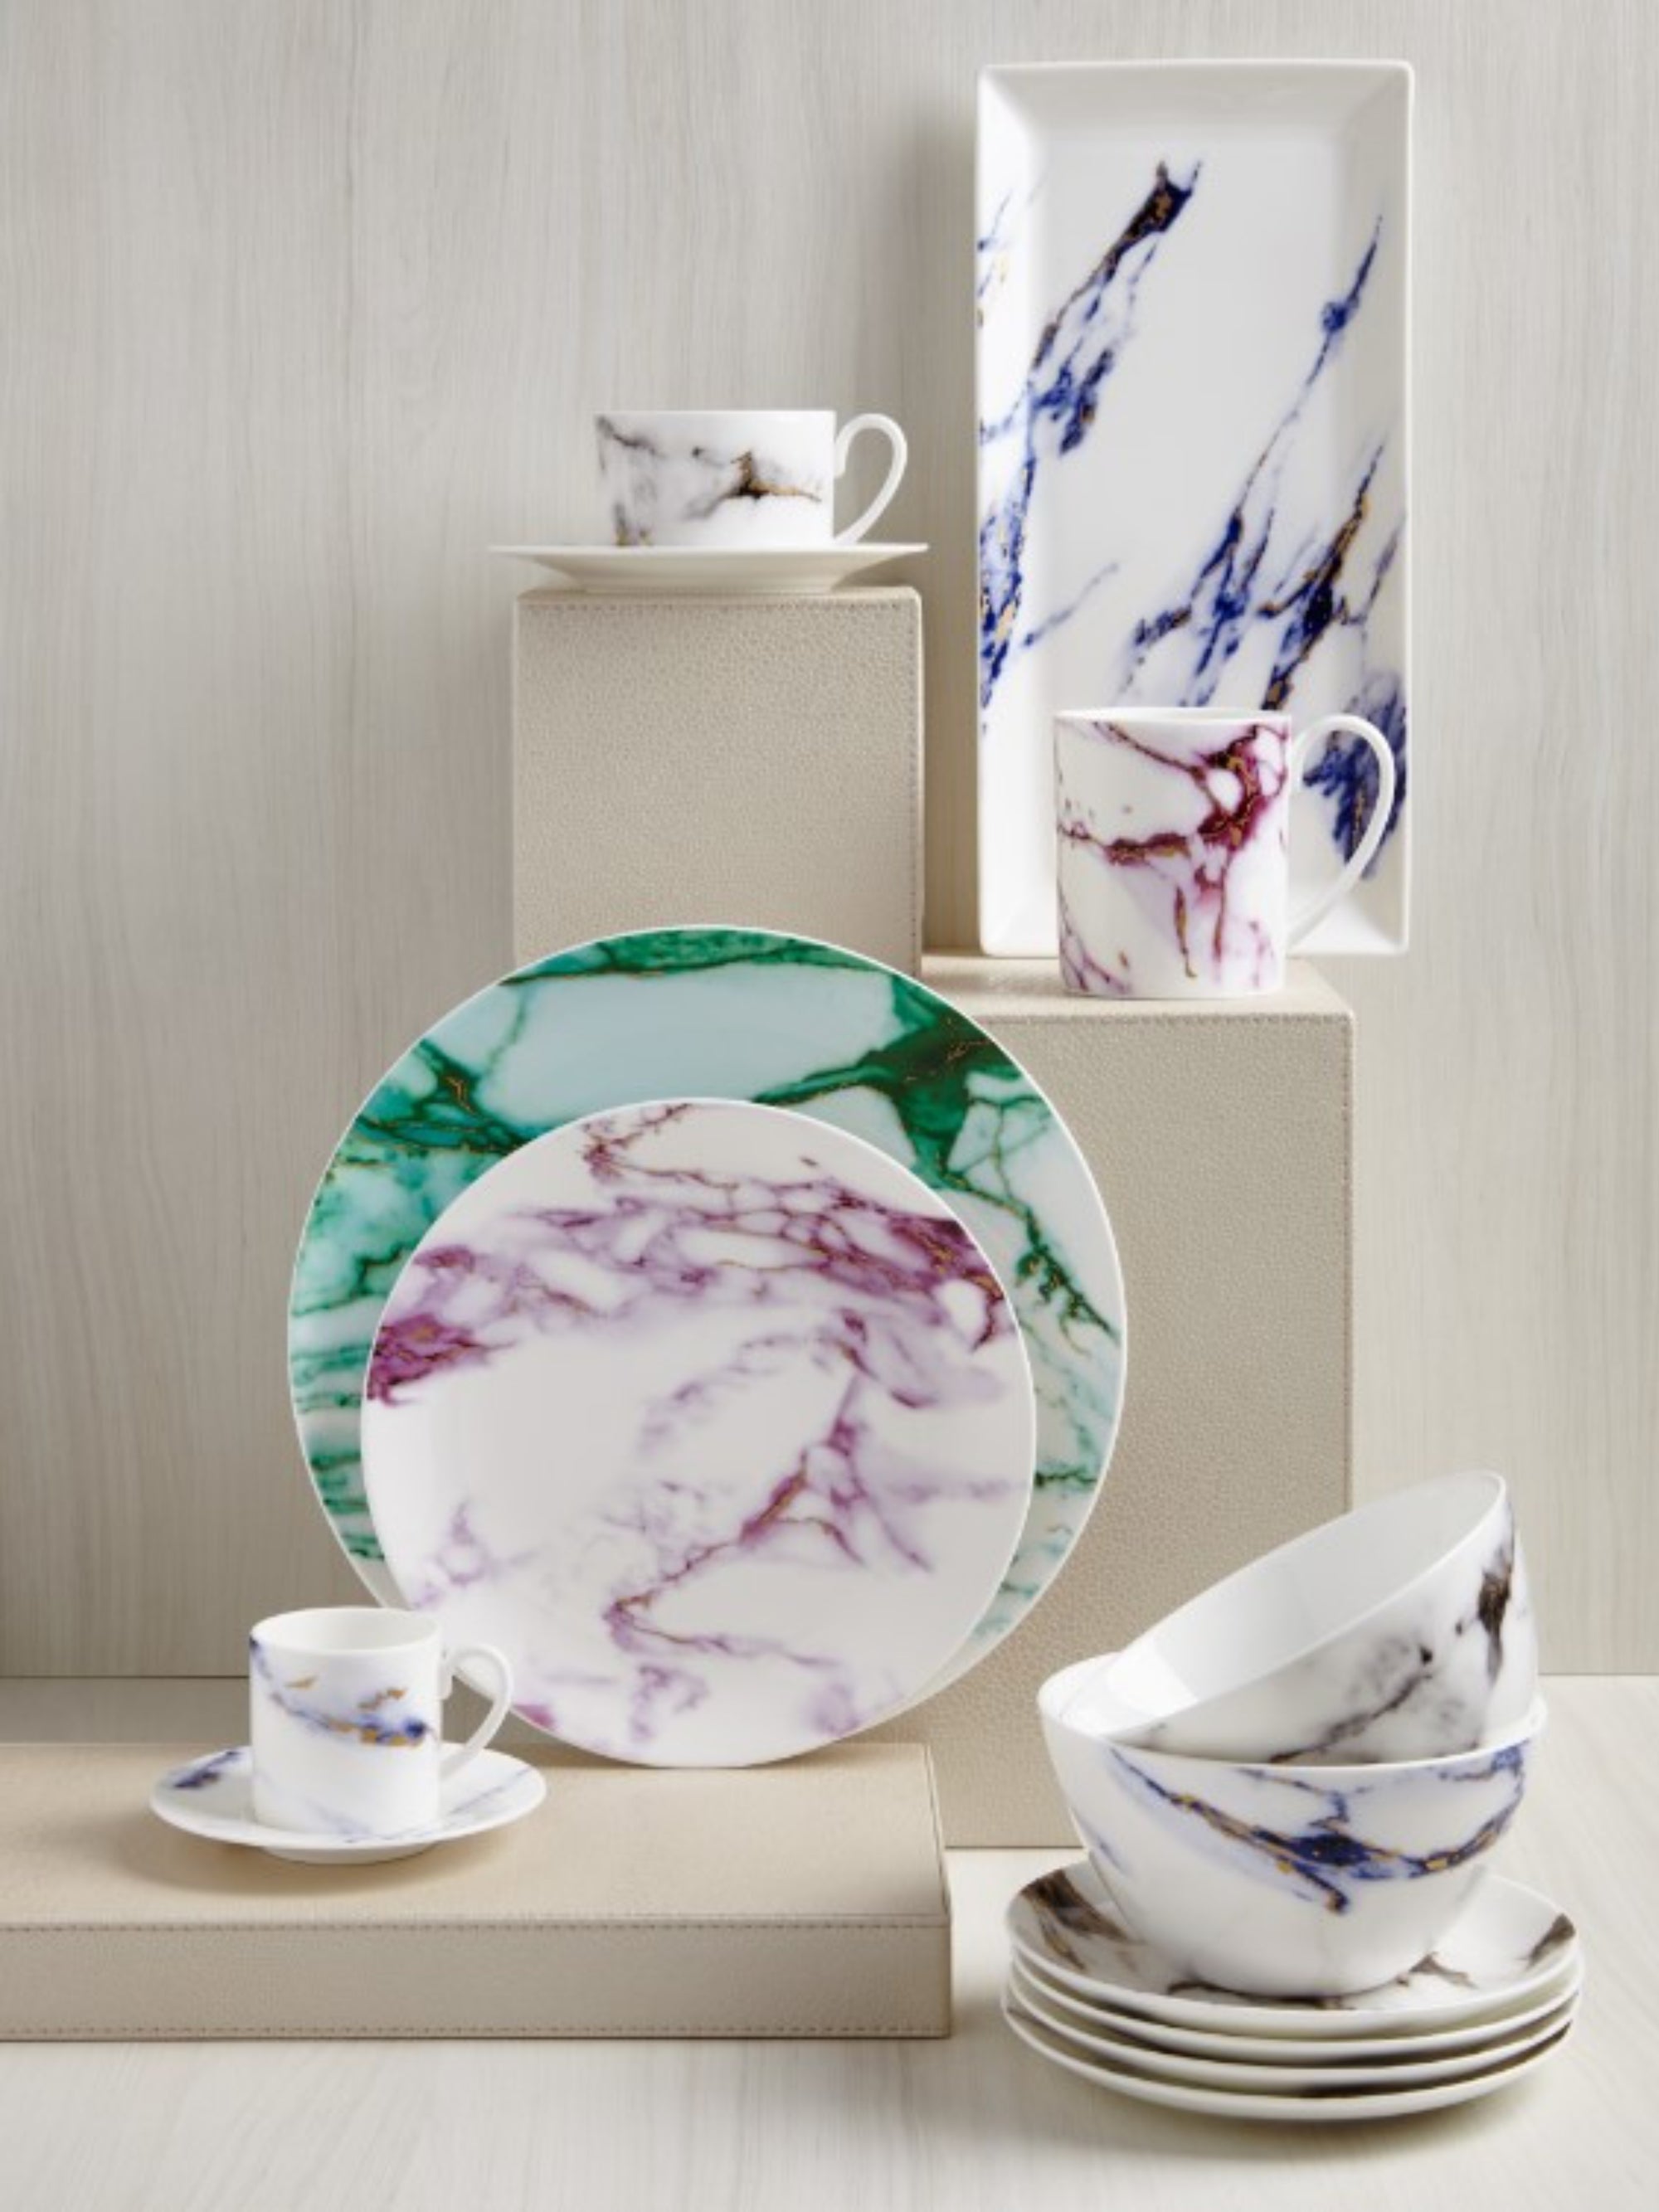 Marble Collection